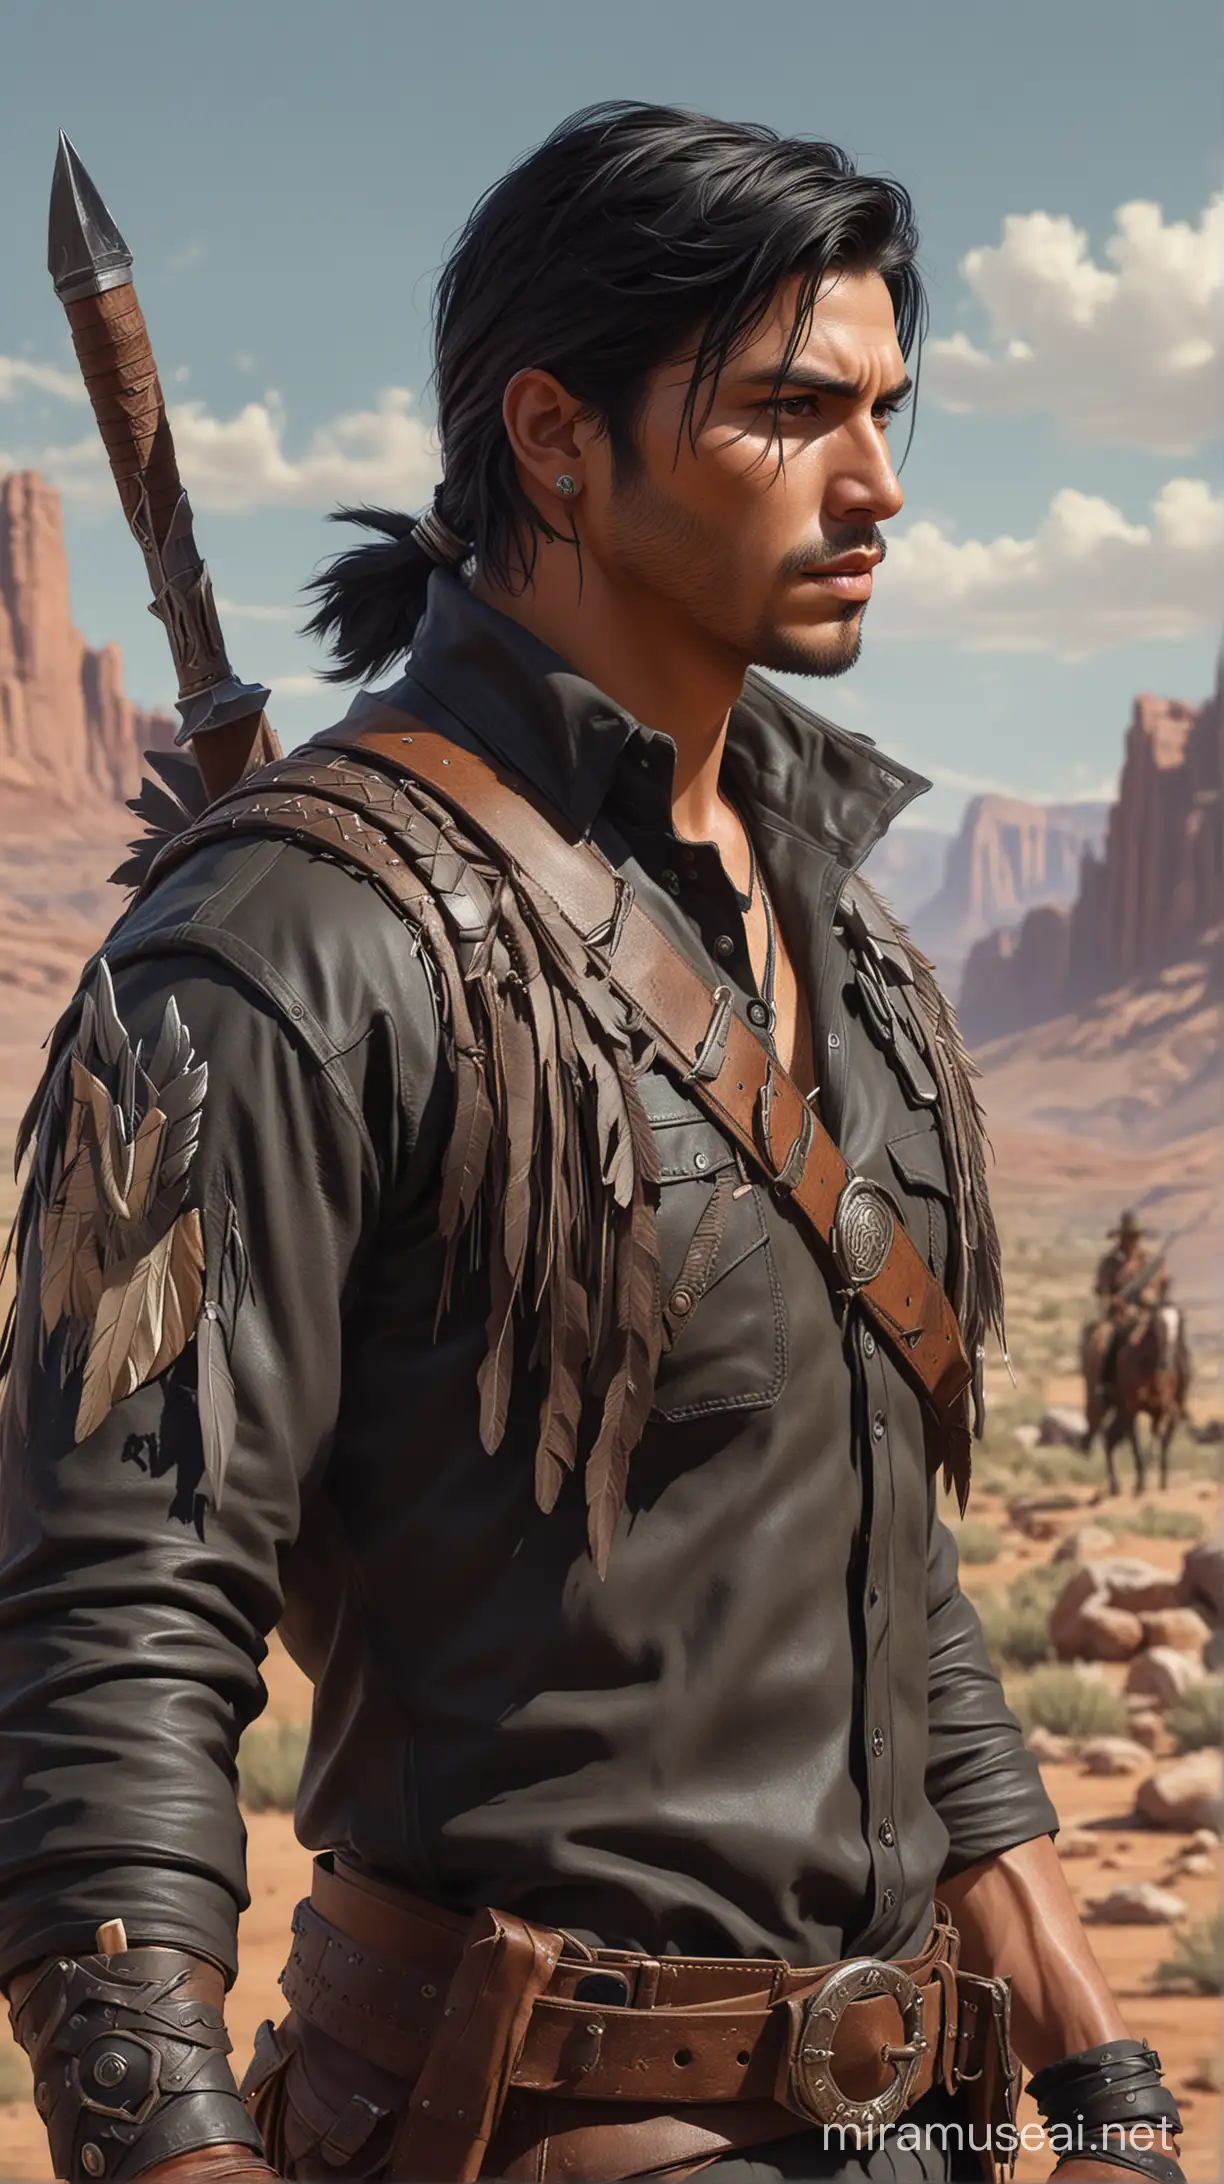 Stylish Native American Warrior with Throwing Knives Surrounded by Enemies in the Wild West